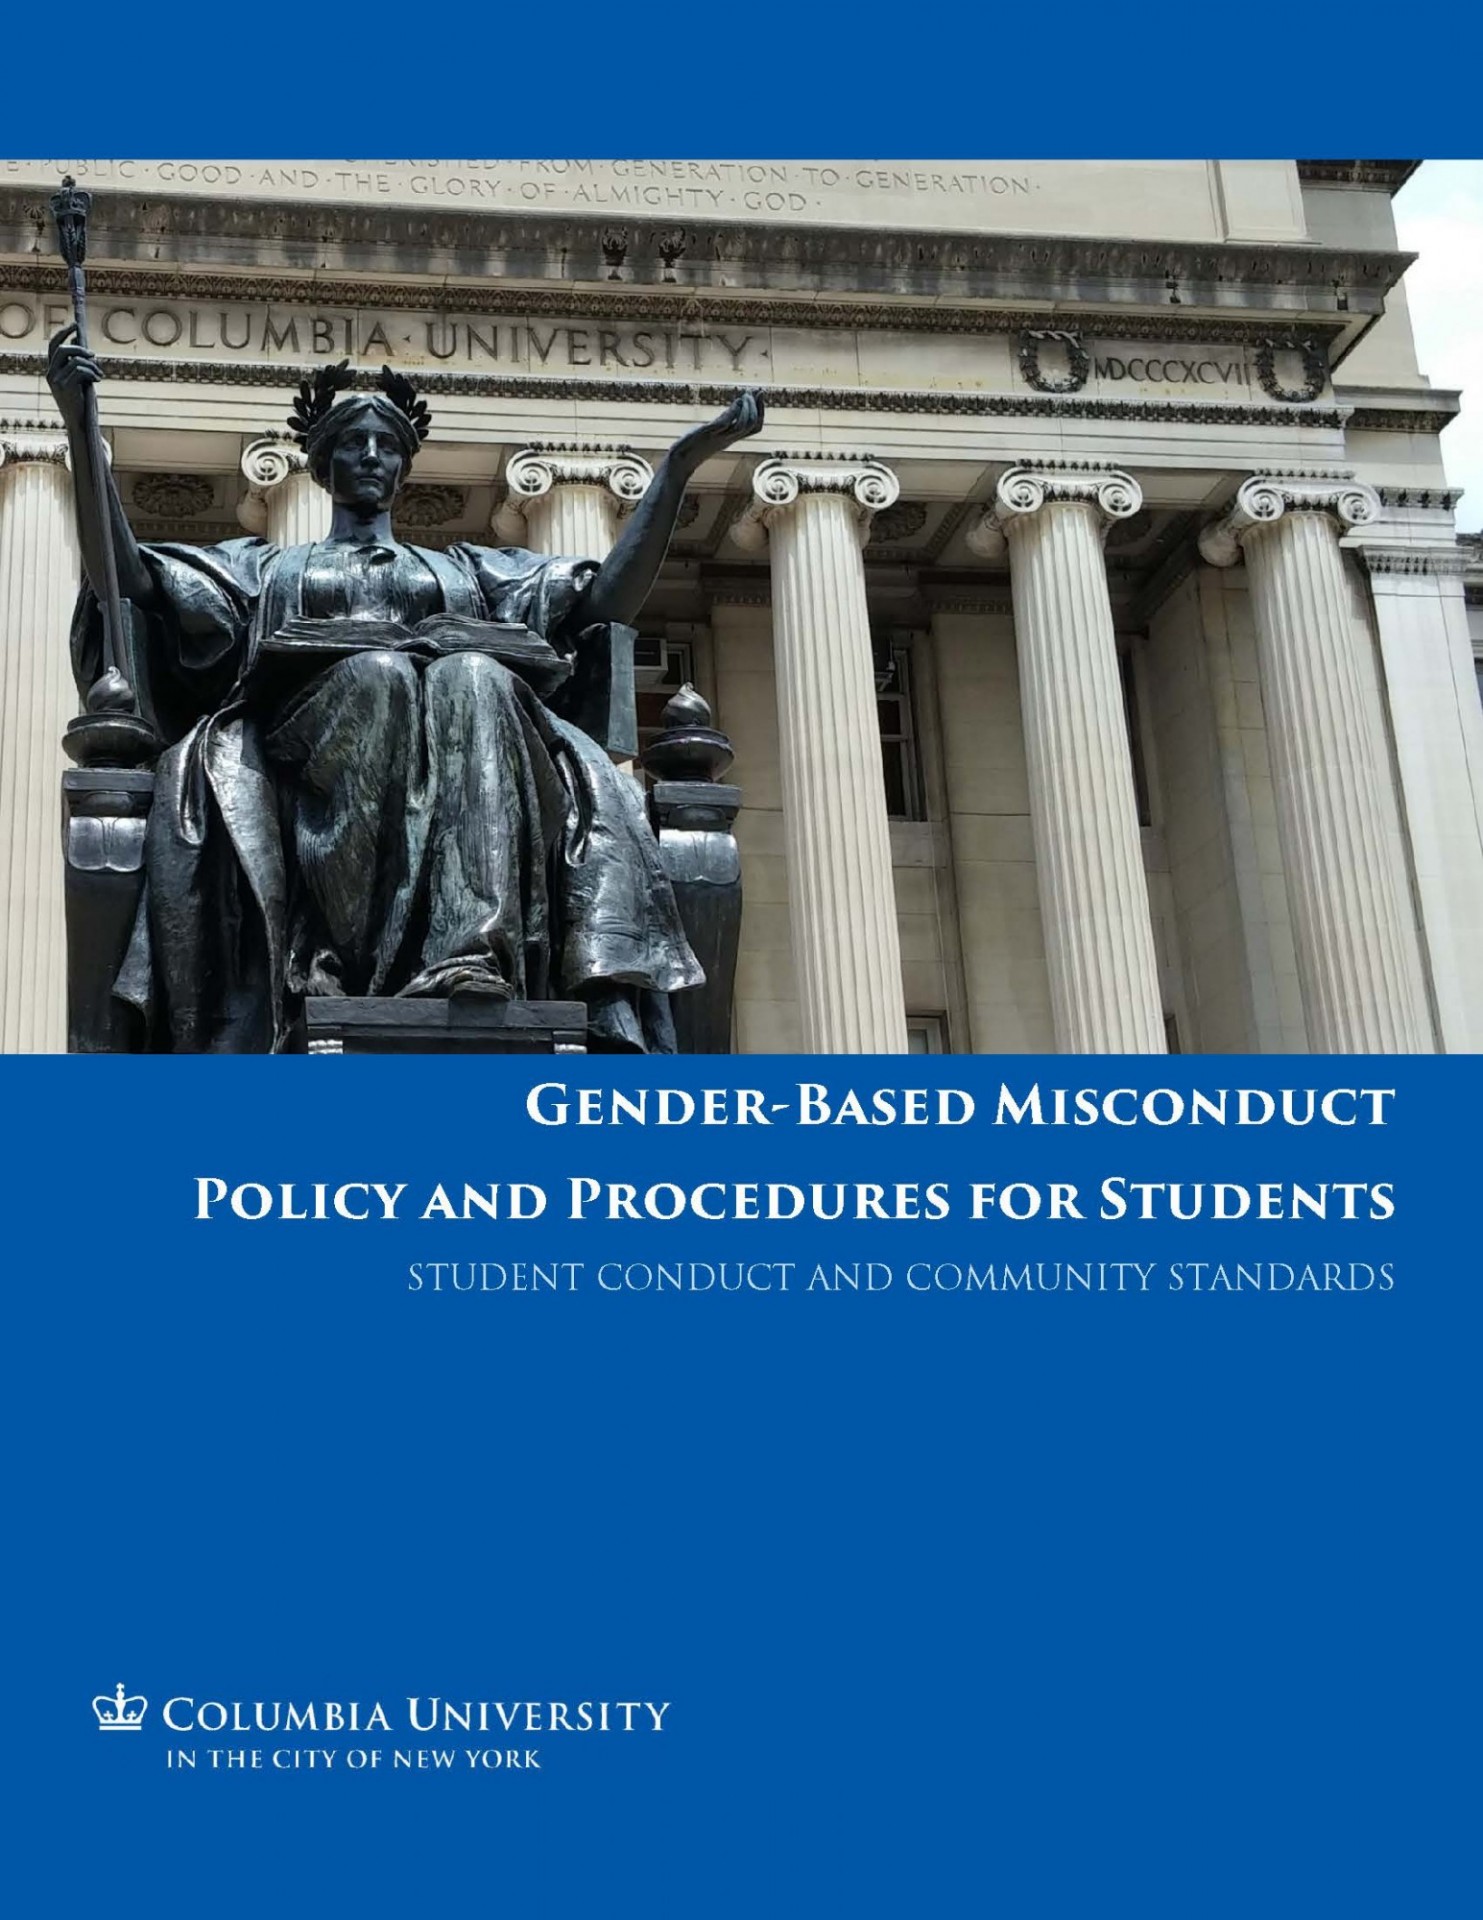 Gender-Based Misconduct Policy Report cover with image of Alma Mater